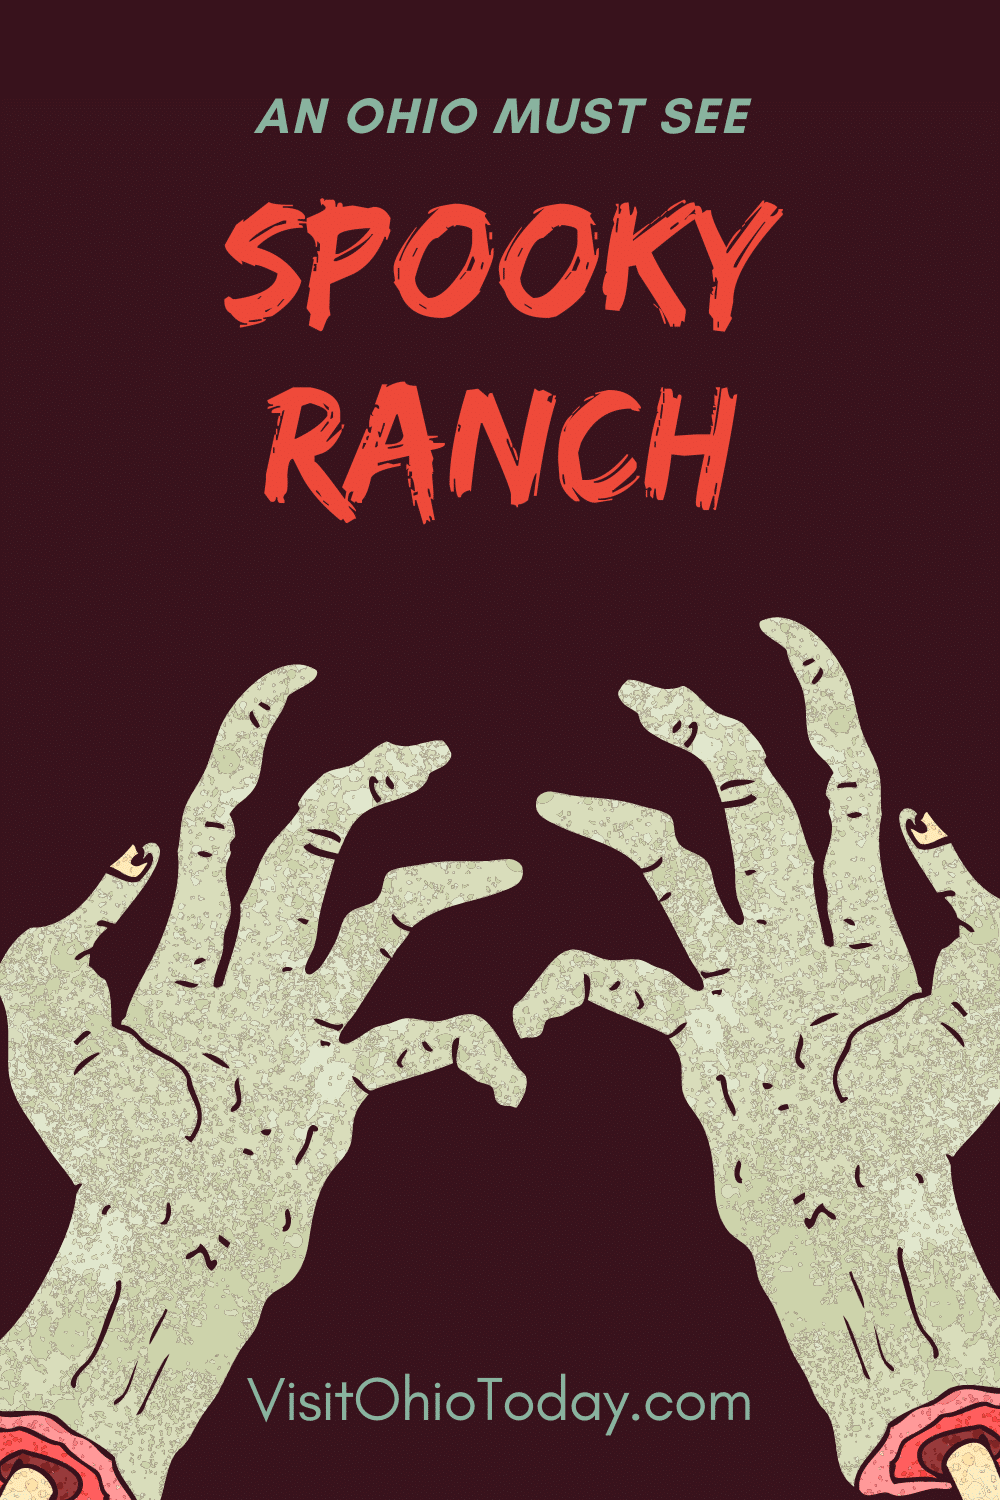 Spooky Ranch, located in Ohio, features 5 haunted attractions and is rated one of the best in the US.